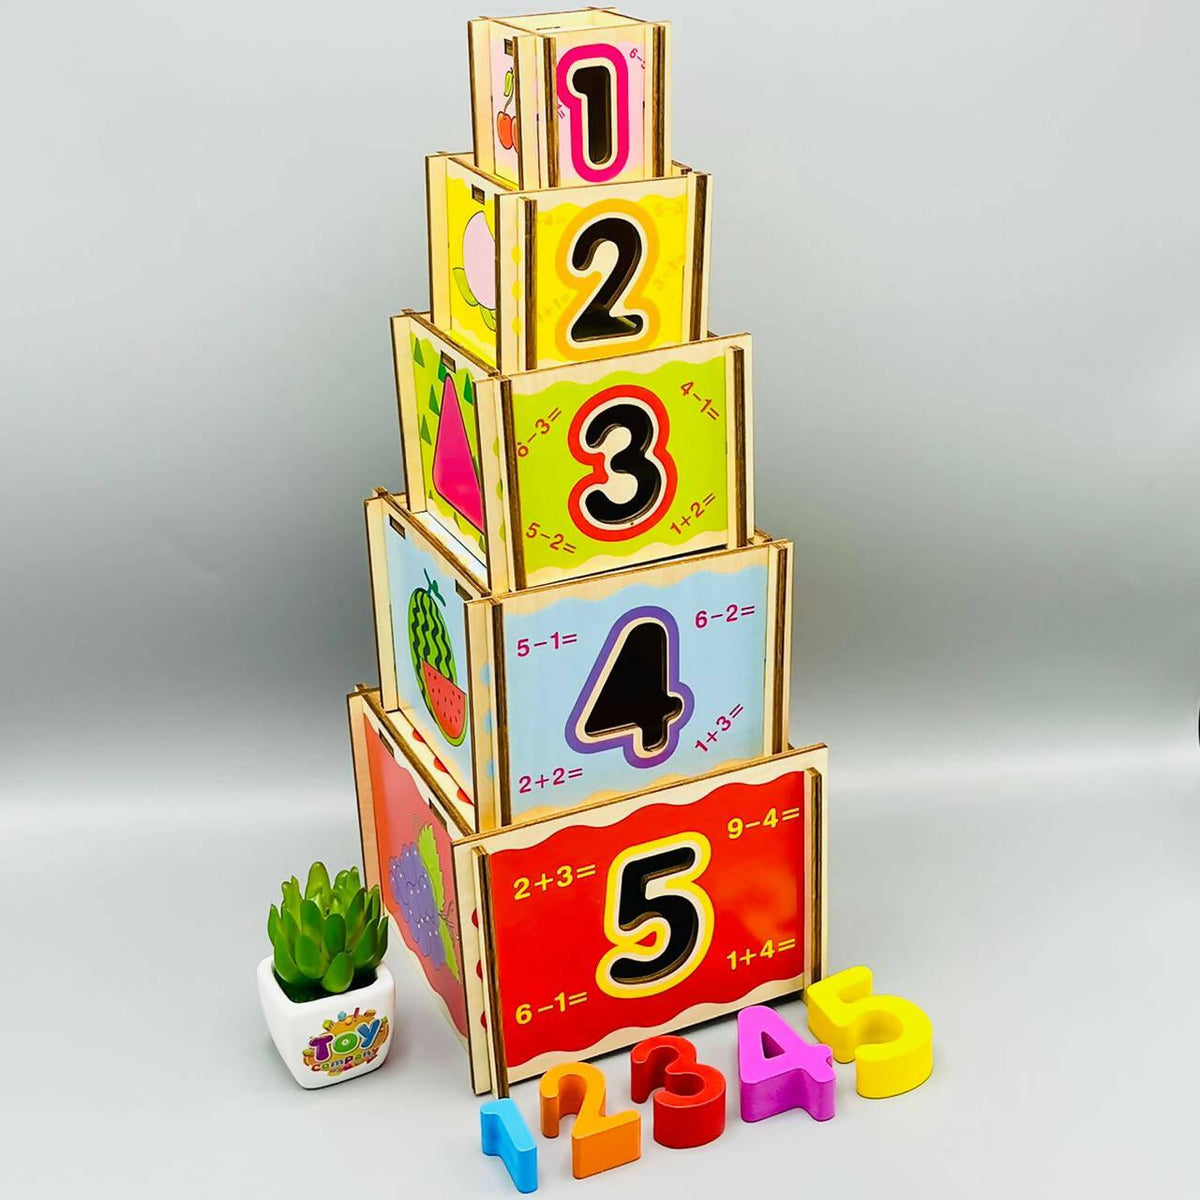 Wooden Nesting Blocks with Numbers - ValueBox